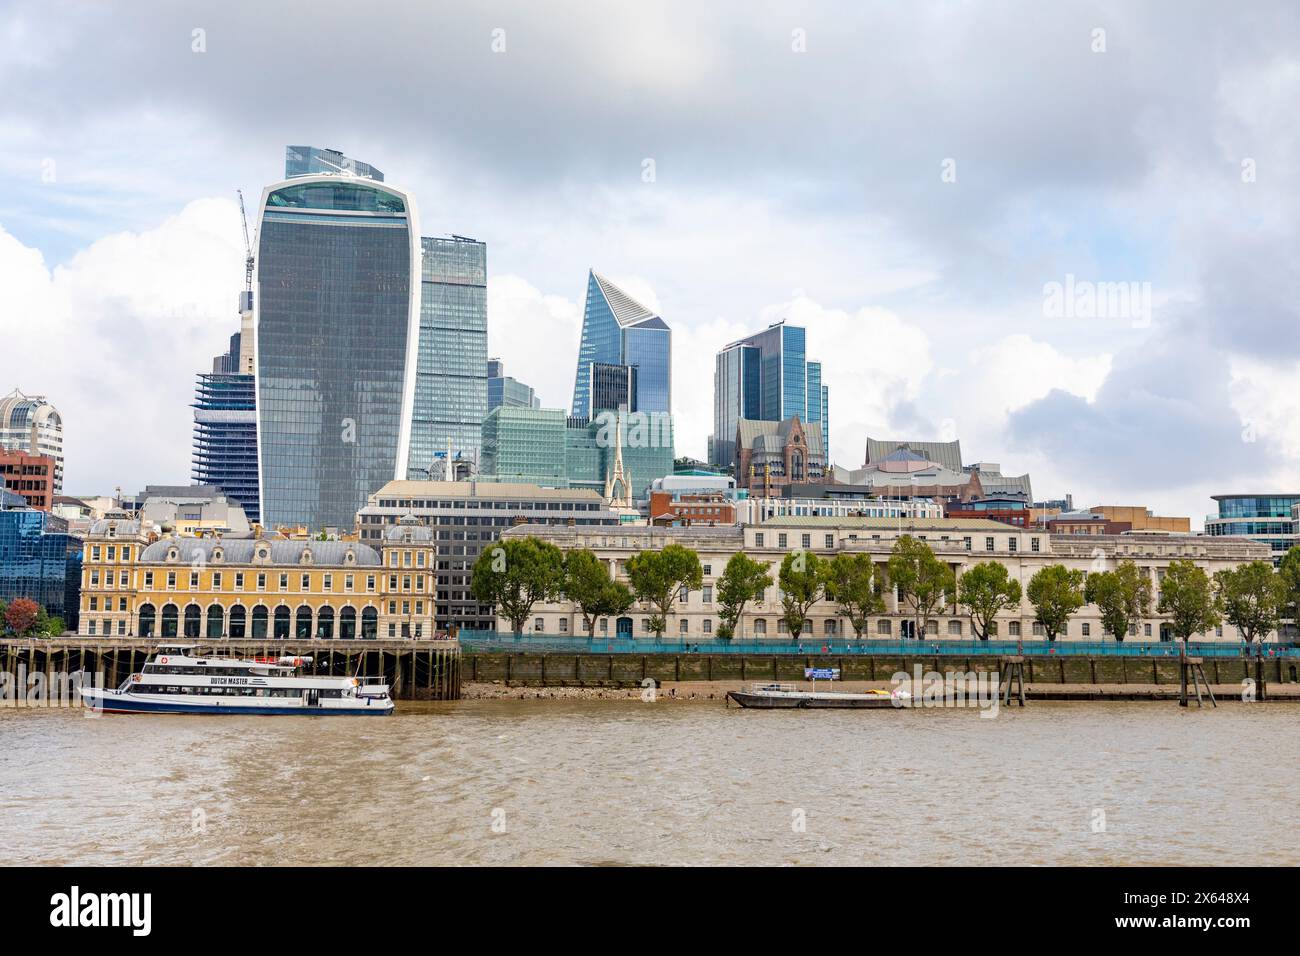 City of London office buildings, Old Billingsgate fish market, Walkie Talkie building and cheesegrater, Custom House on River Thames, London,England Stock Photo